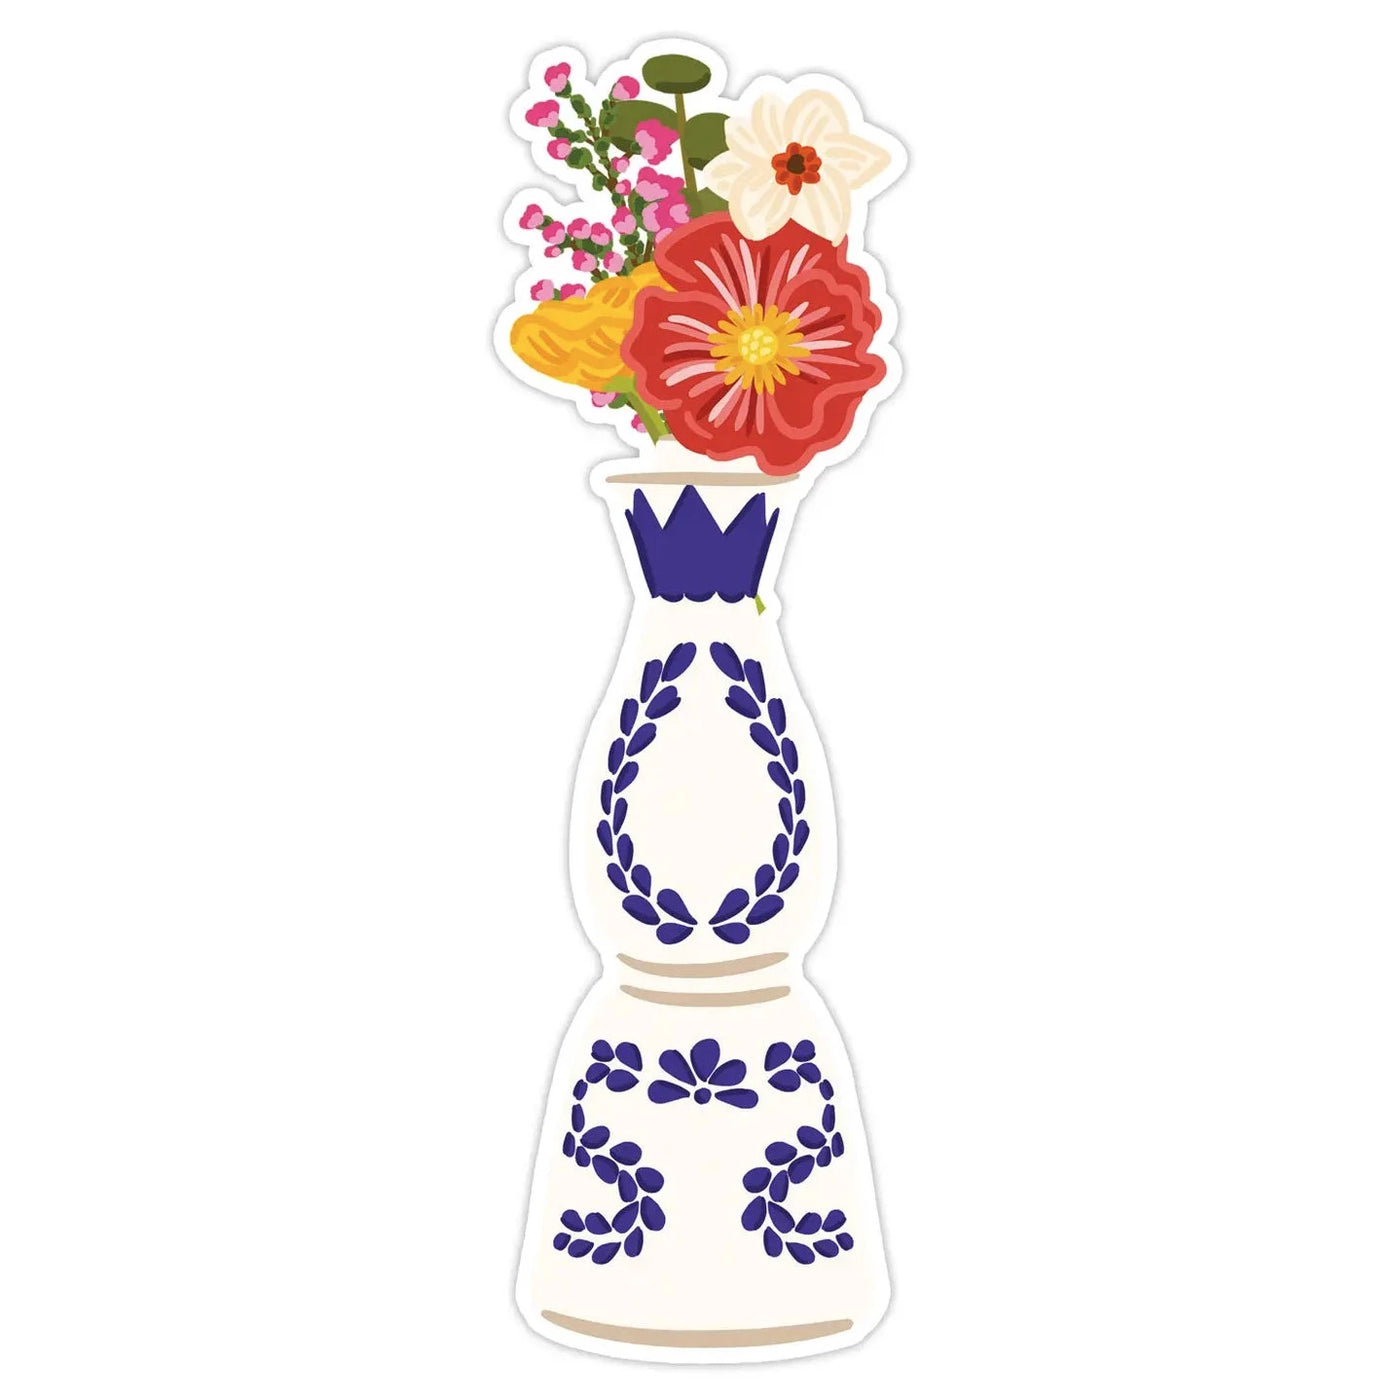 Blue and white tequila bottle used as a vase with a variety of colorful flowers 